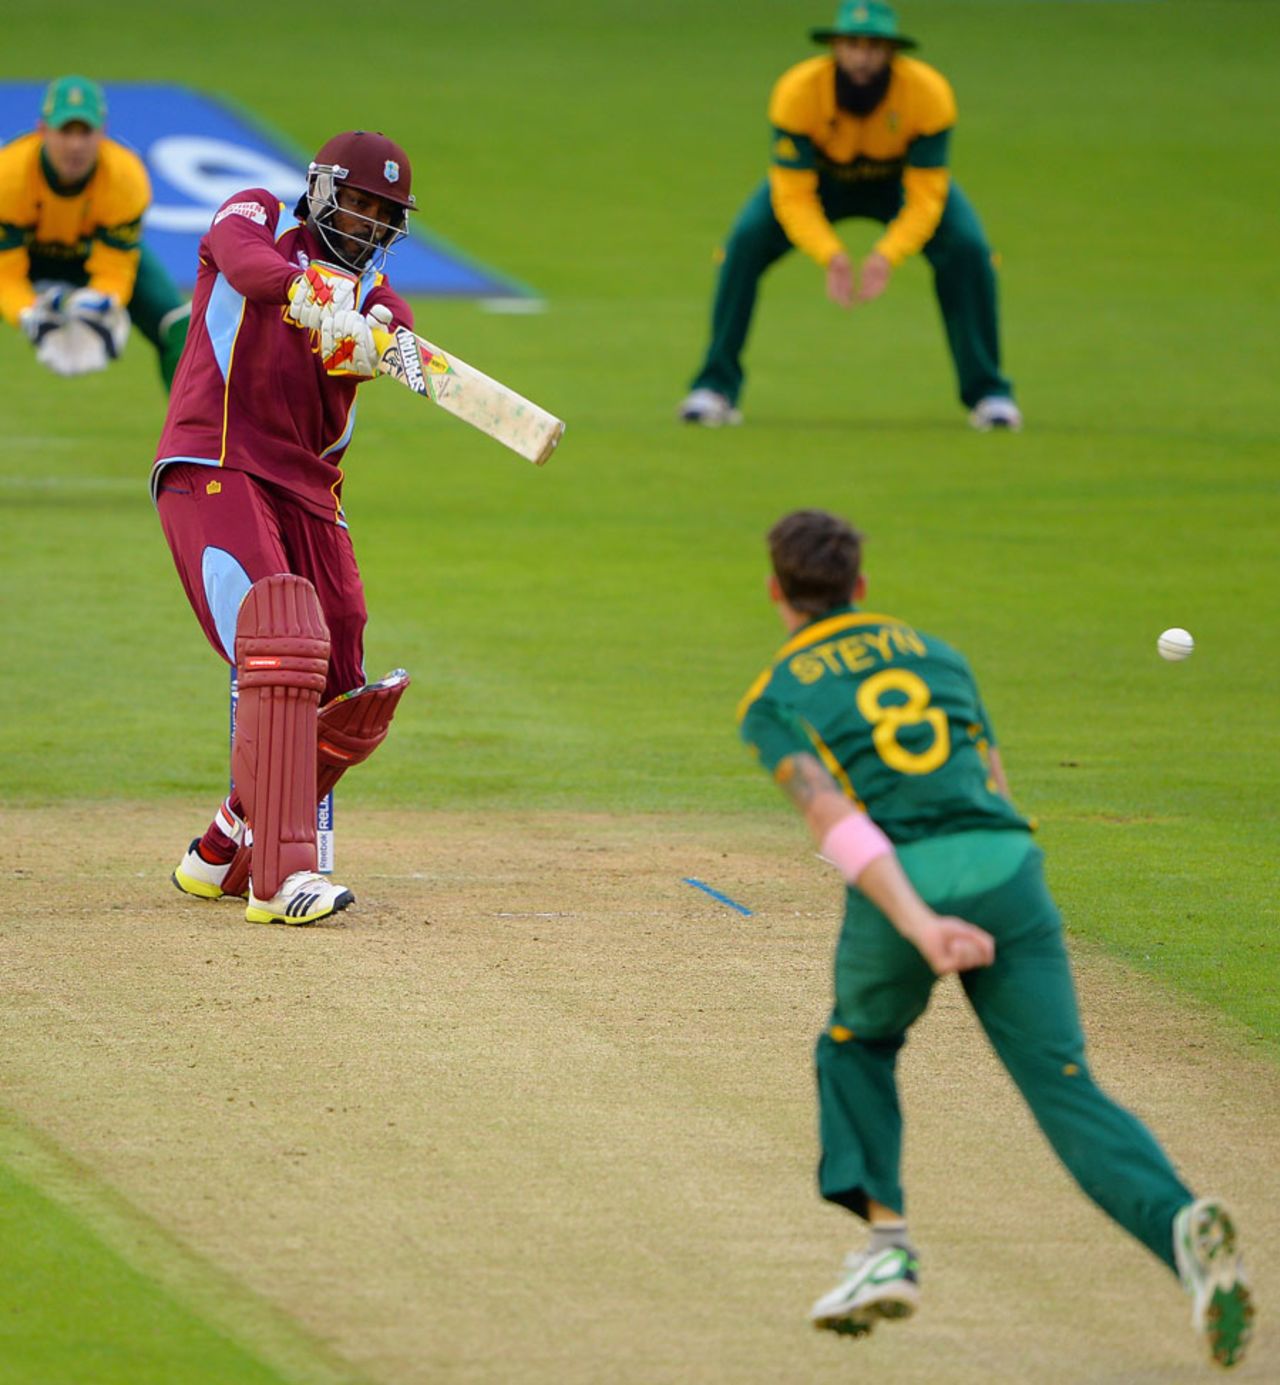 Chris Gayle hits back past Dale Steyn, South Africa v West Indies, Champions Trophy, Group B, Cardiff, June 14, 2013